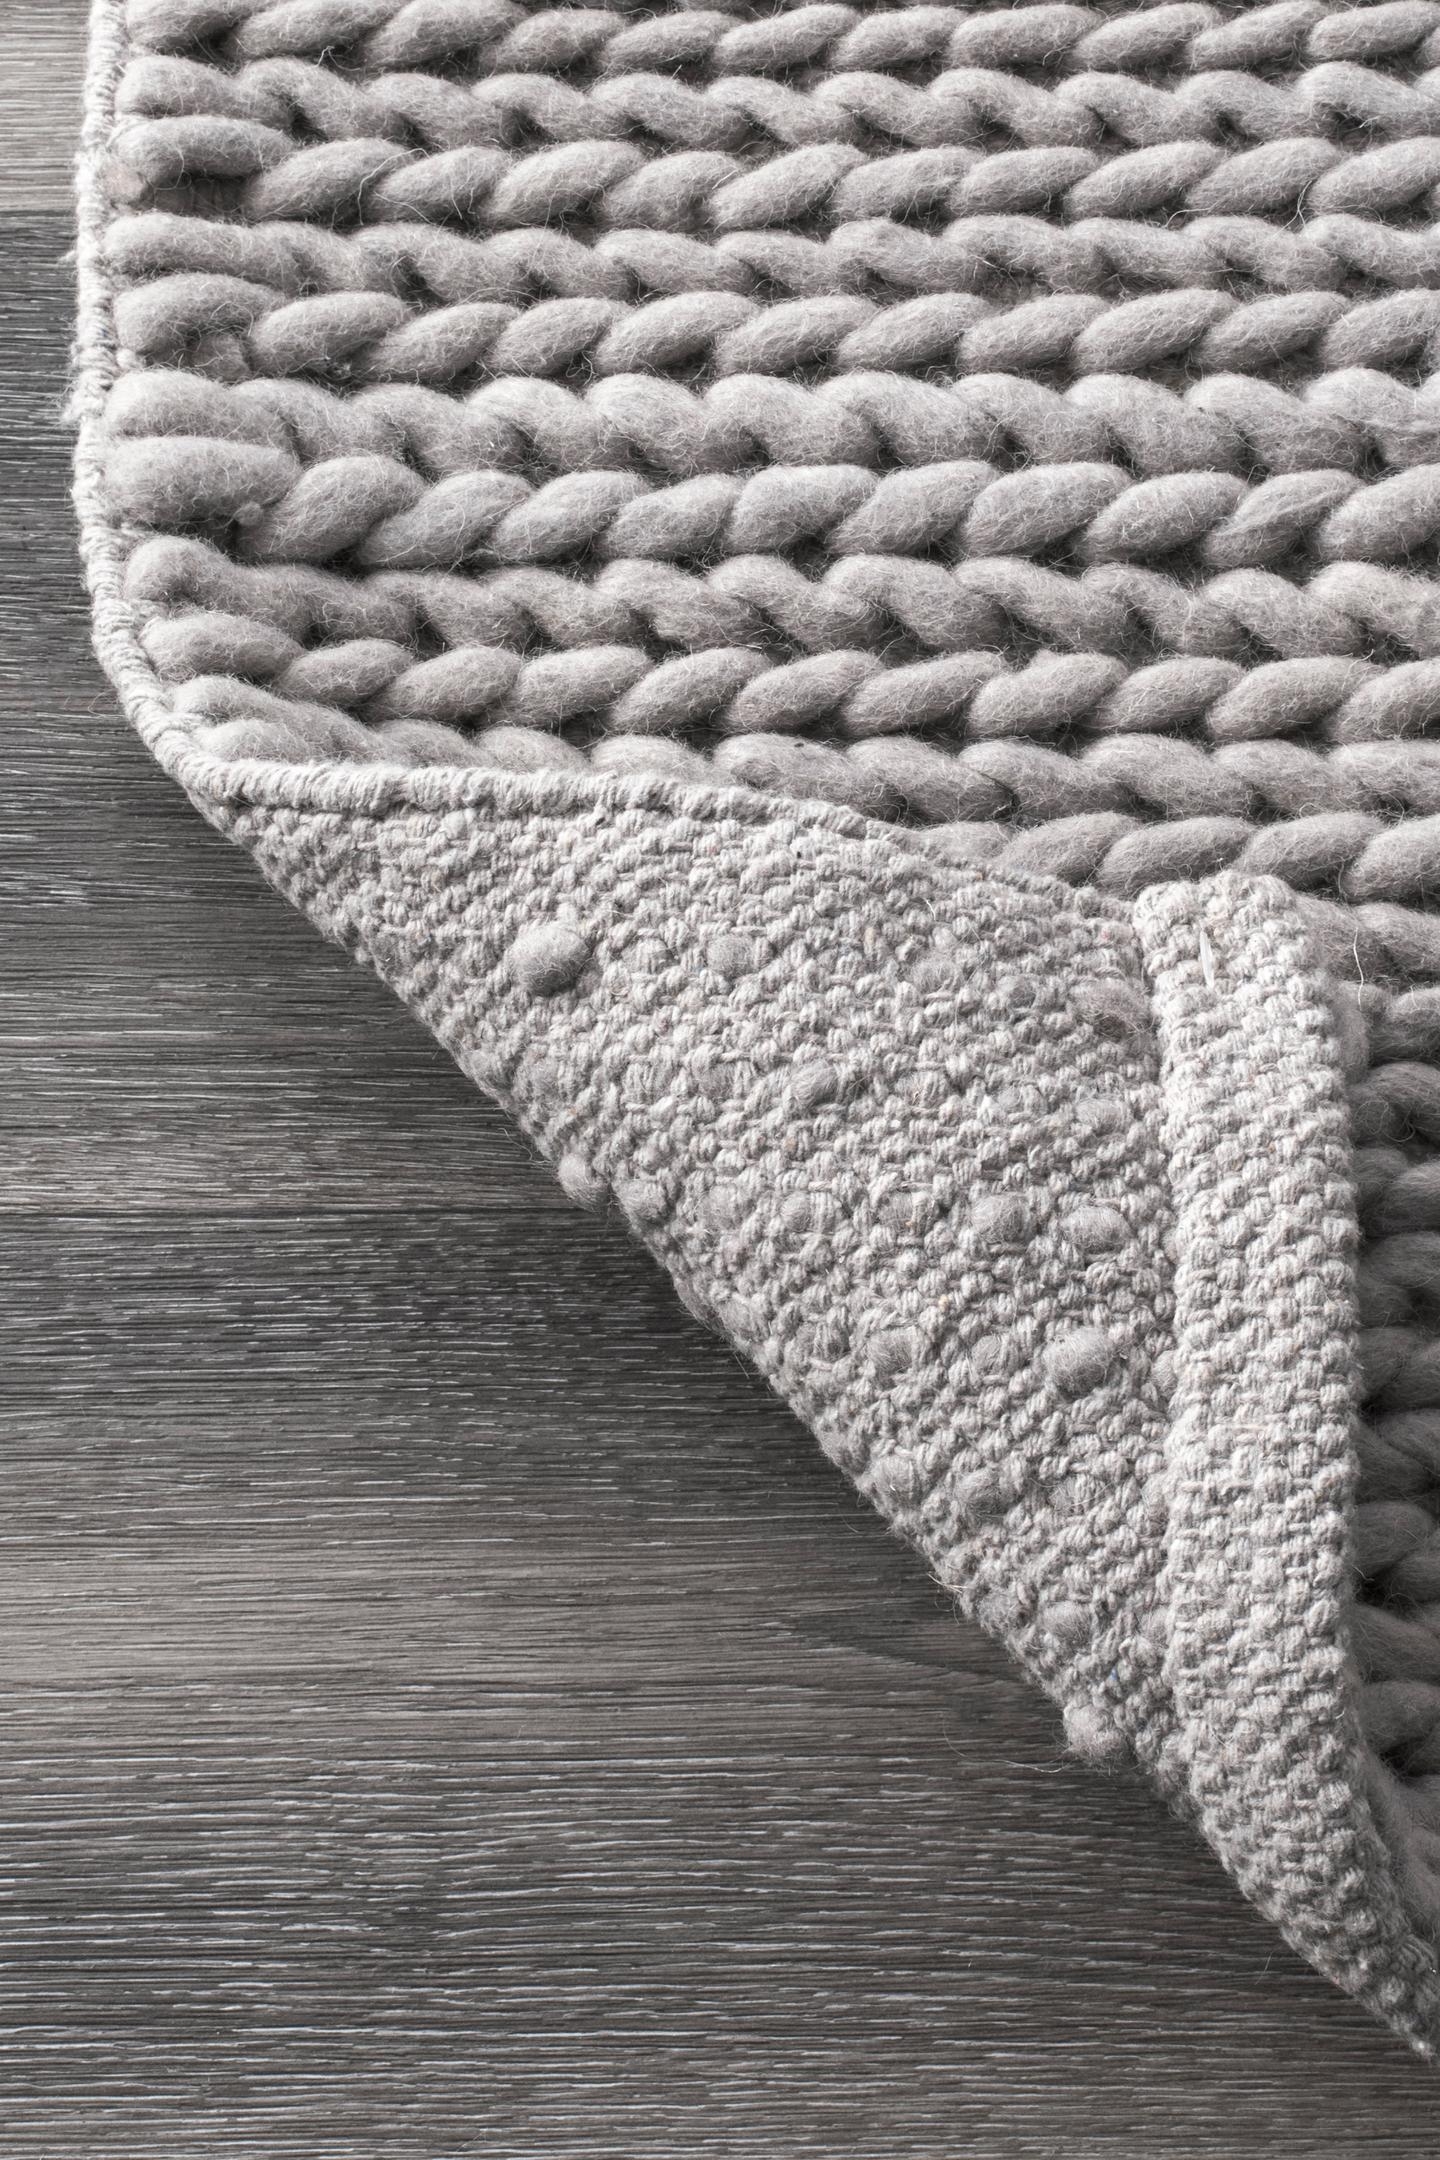 Hand Woven Chunky Woolen Cable Rug Area Rug - Image 3